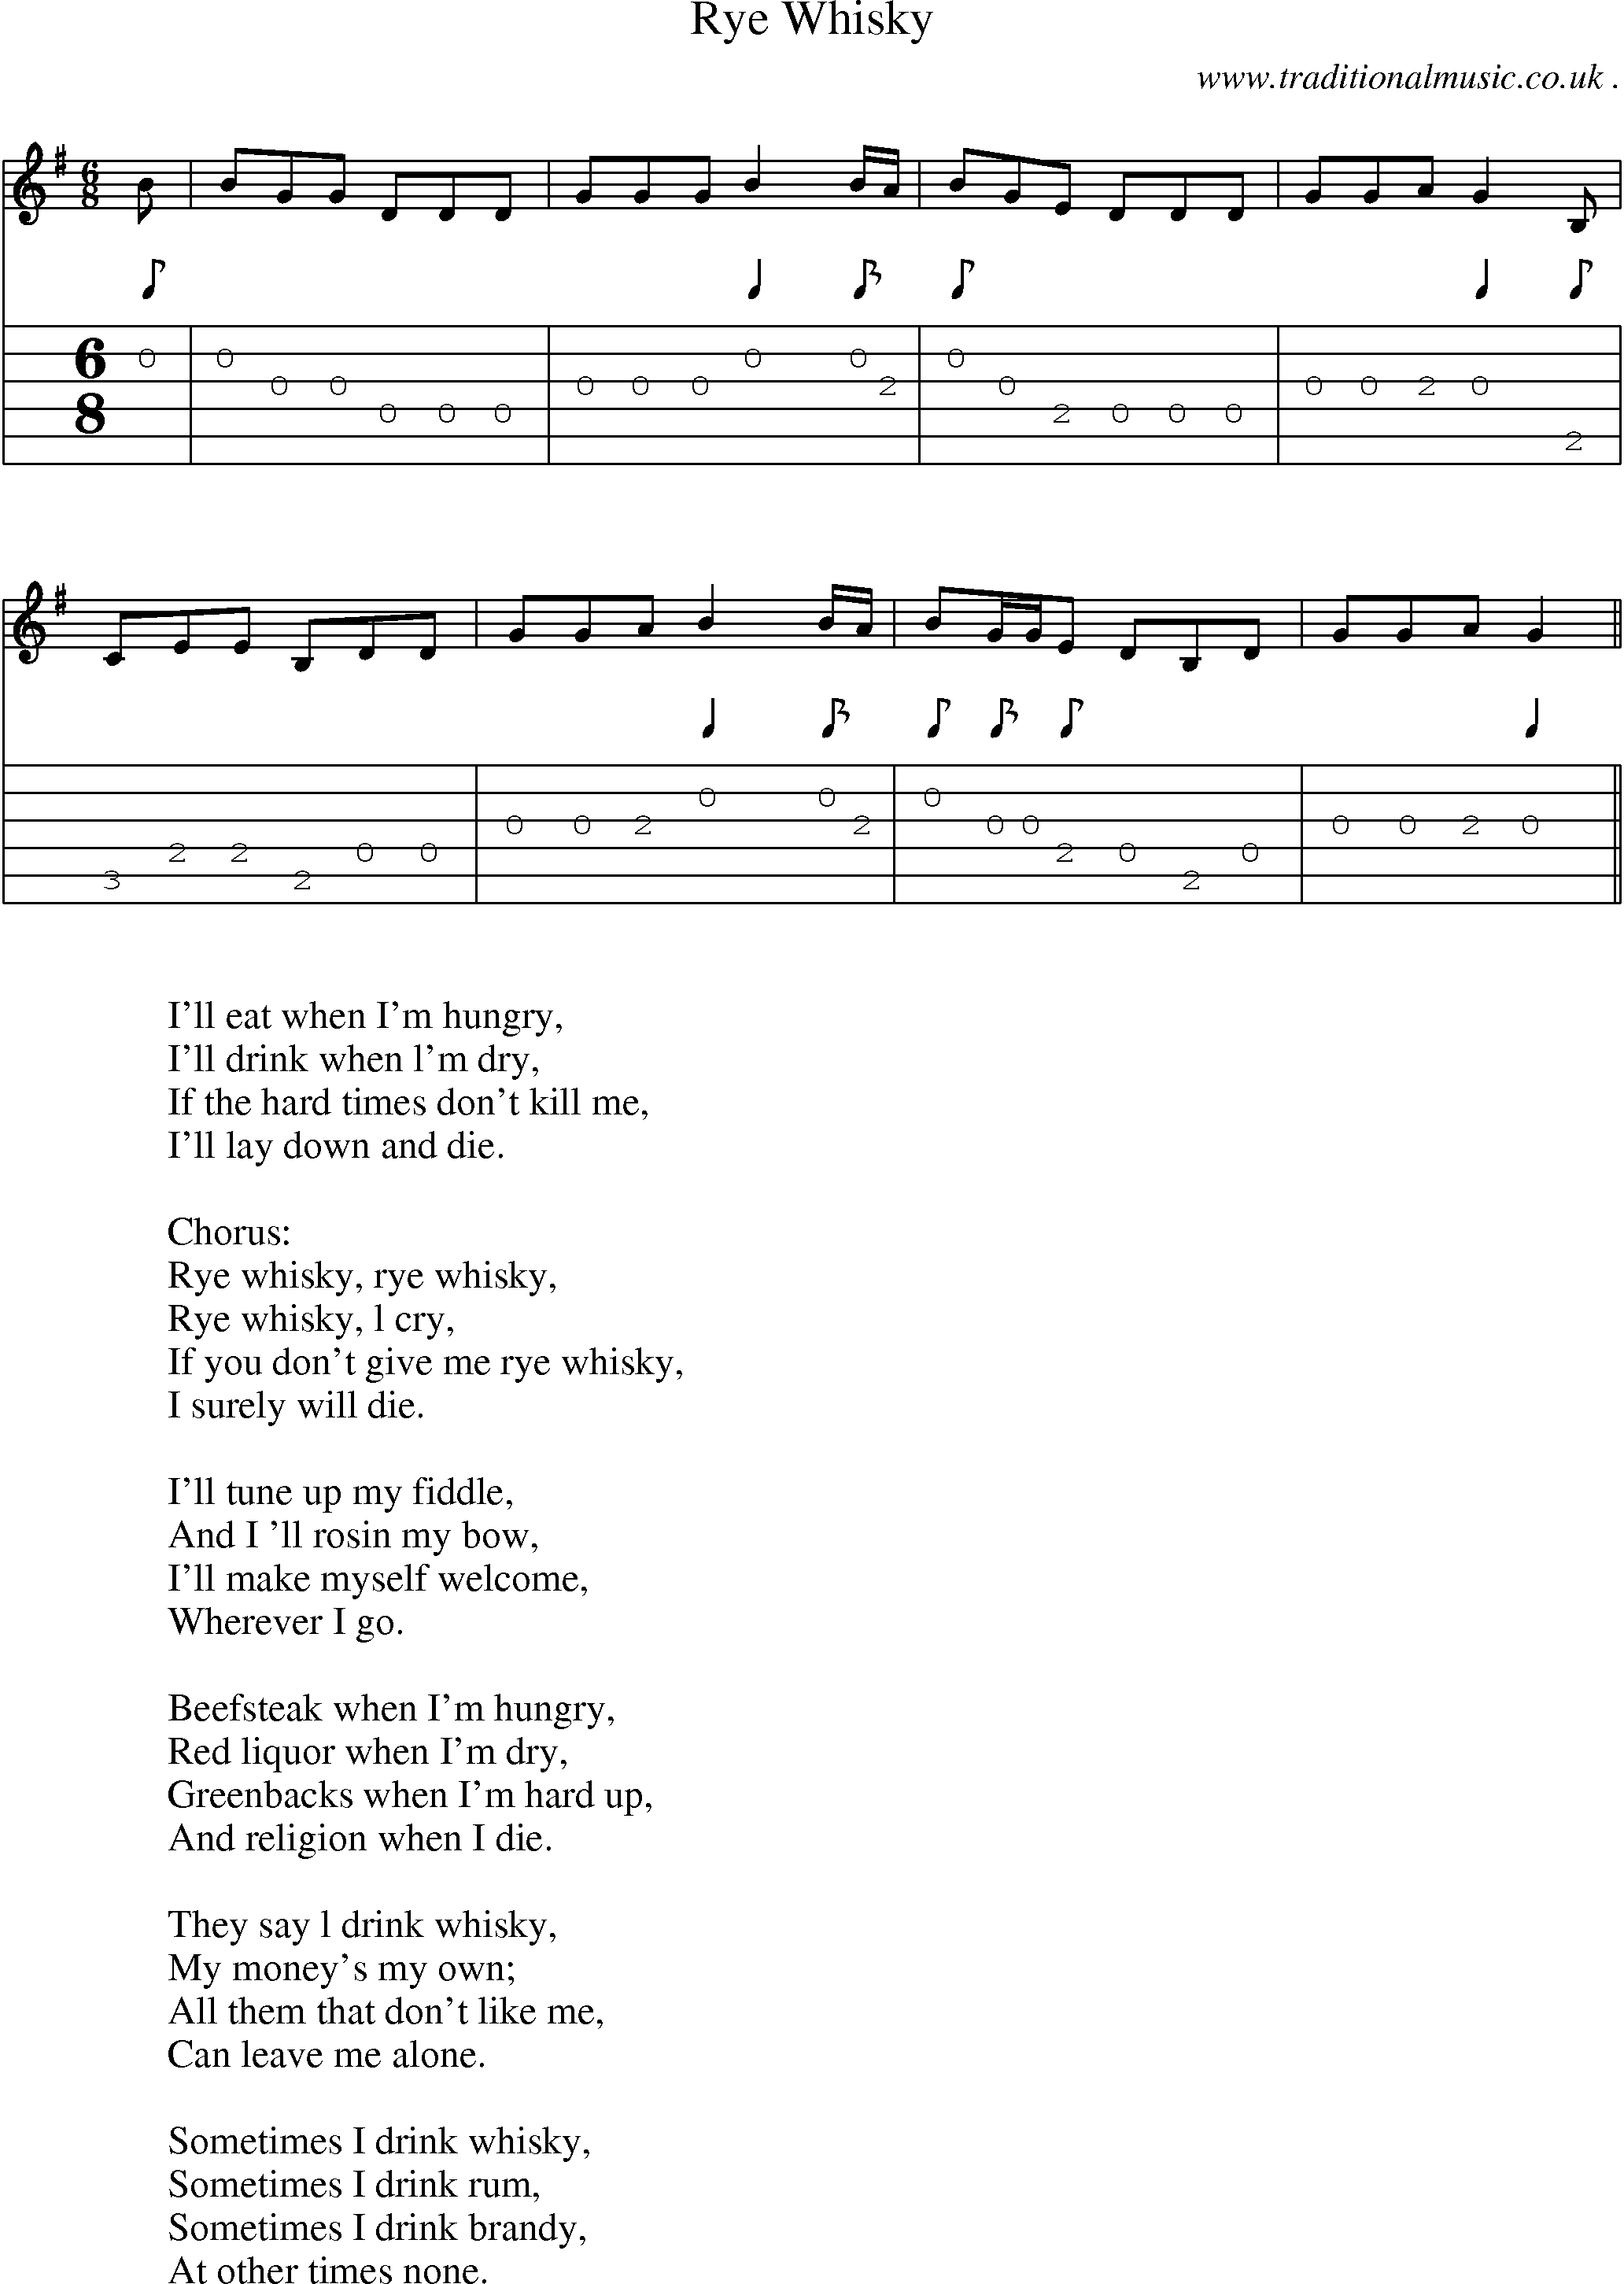 Music Score and Guitar Tabs for Rye Whisky